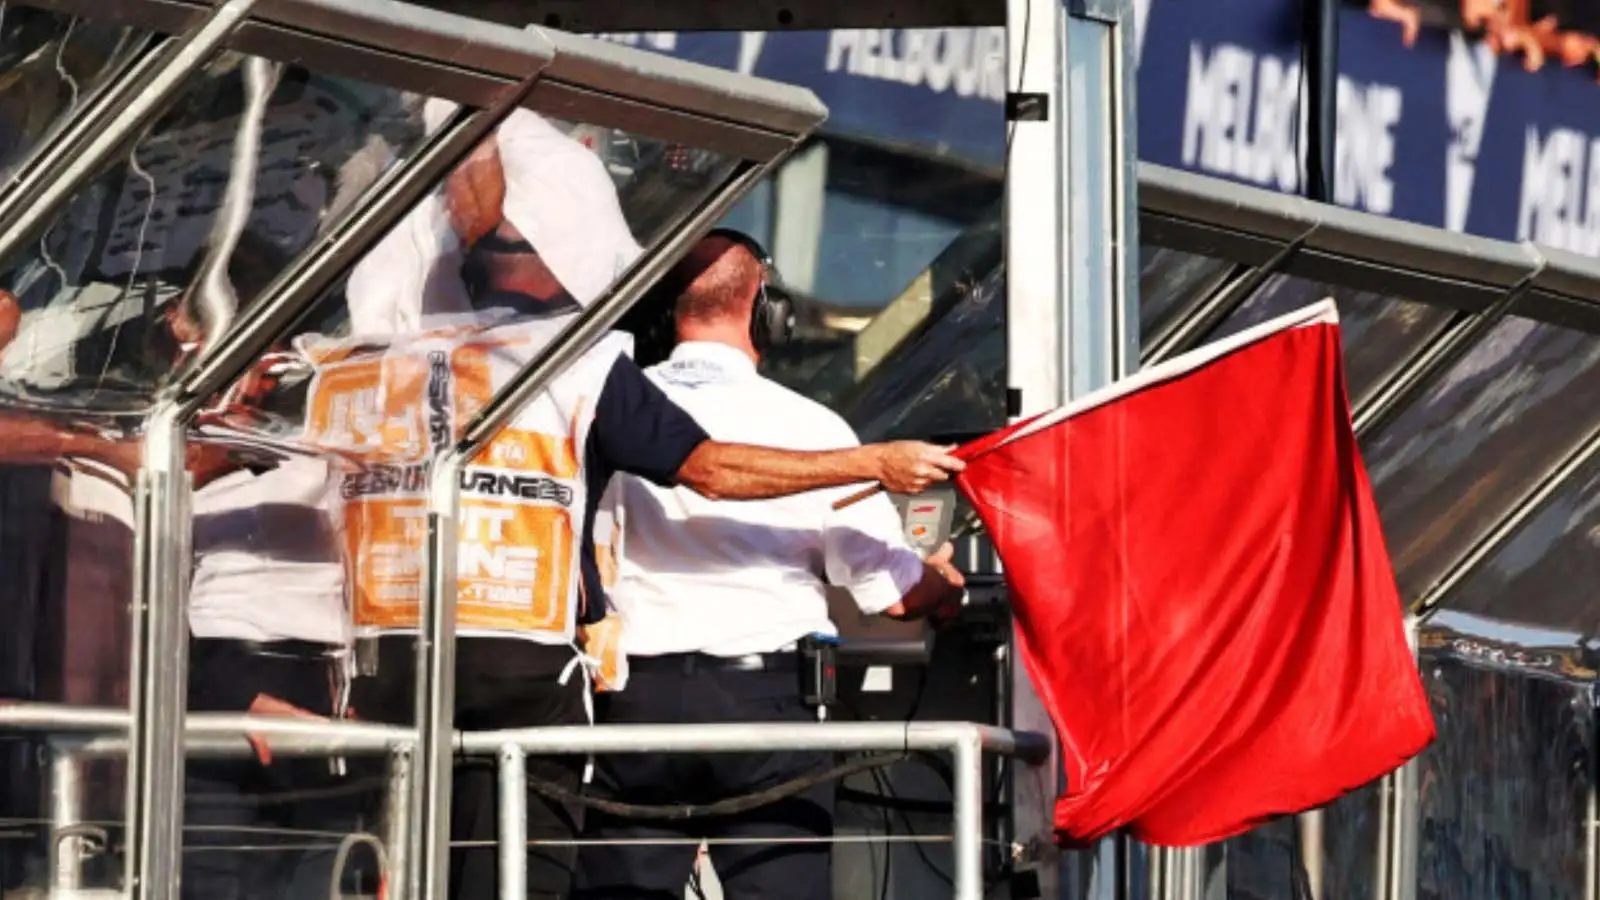 The red flag is waved from the gantry. Melbourne April 2023.